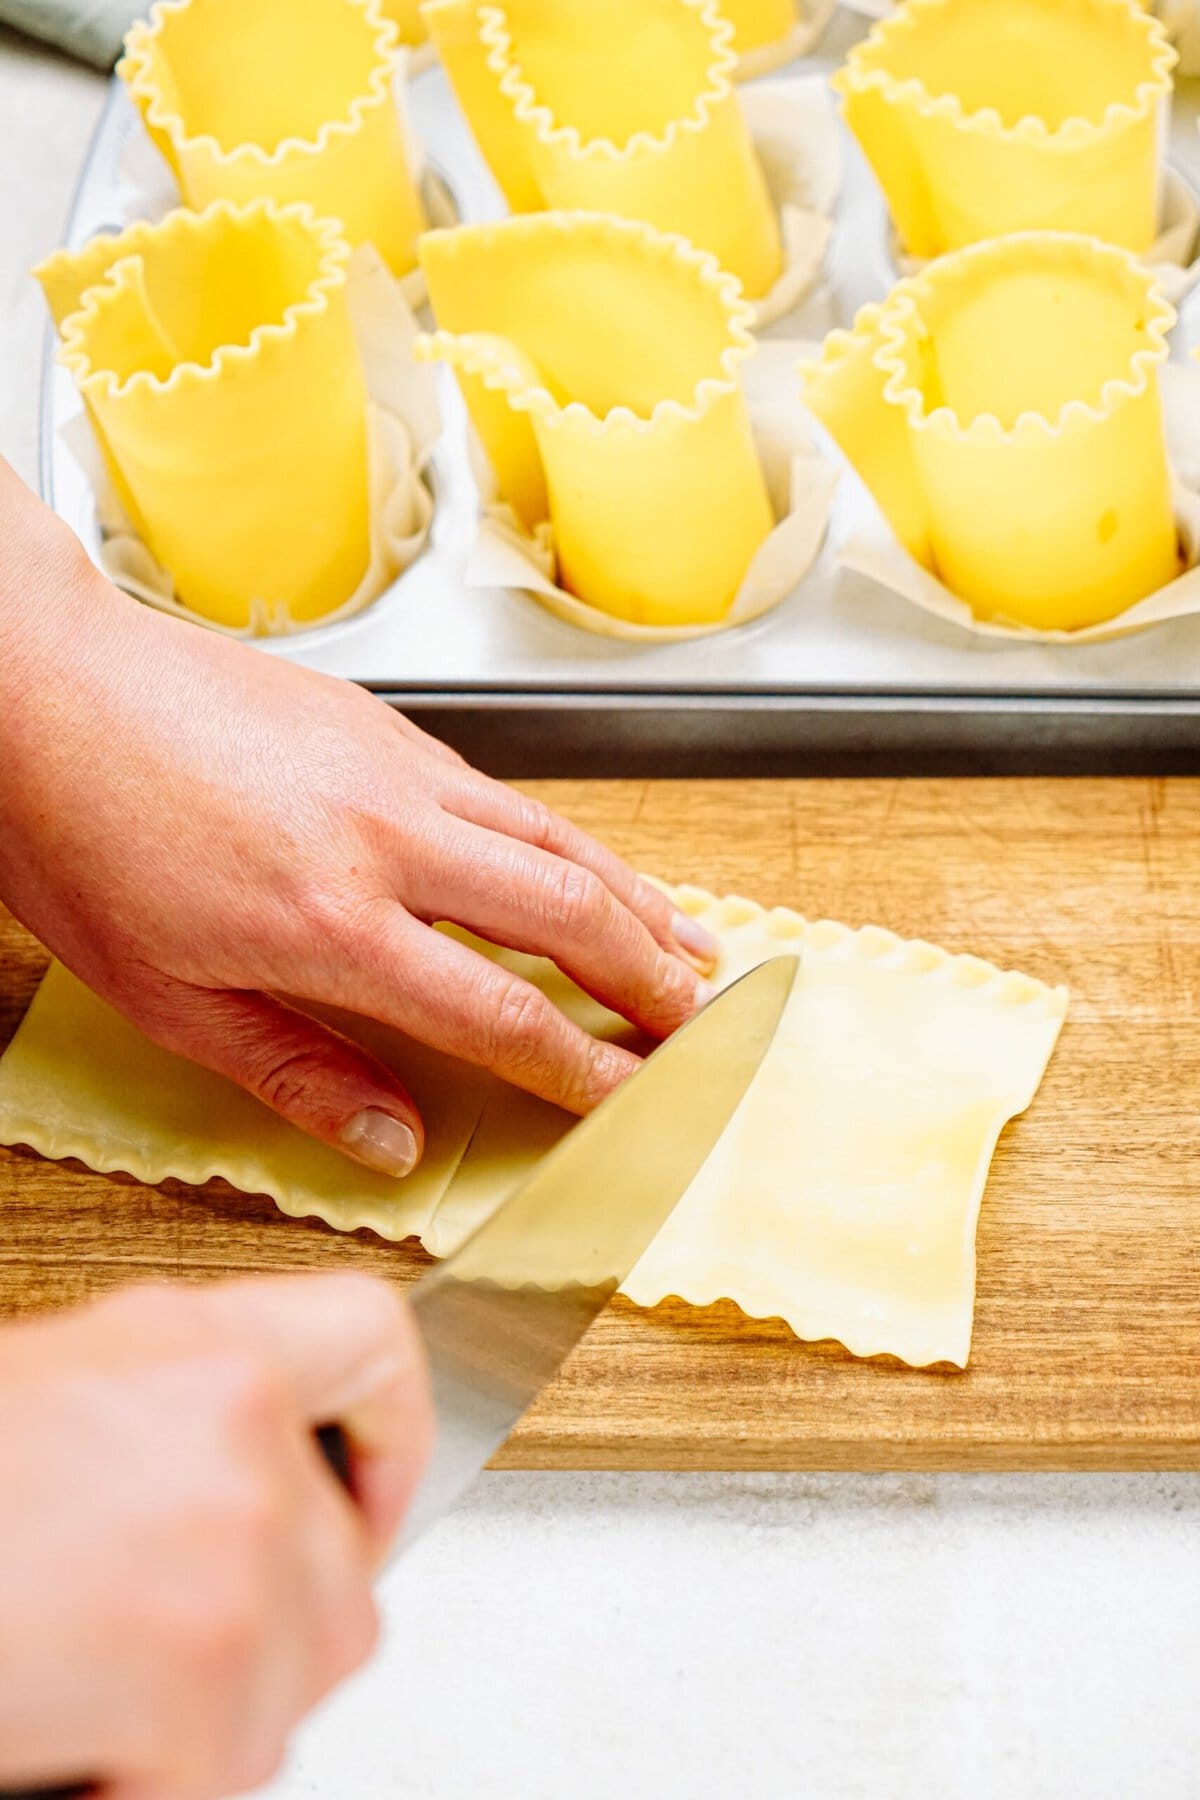 Hands cutting lasagna noodles on a wooden board with a knife. Rolled pasta sheets in muffin tin visible in the background, ready to shape into delicious lasagna cups.